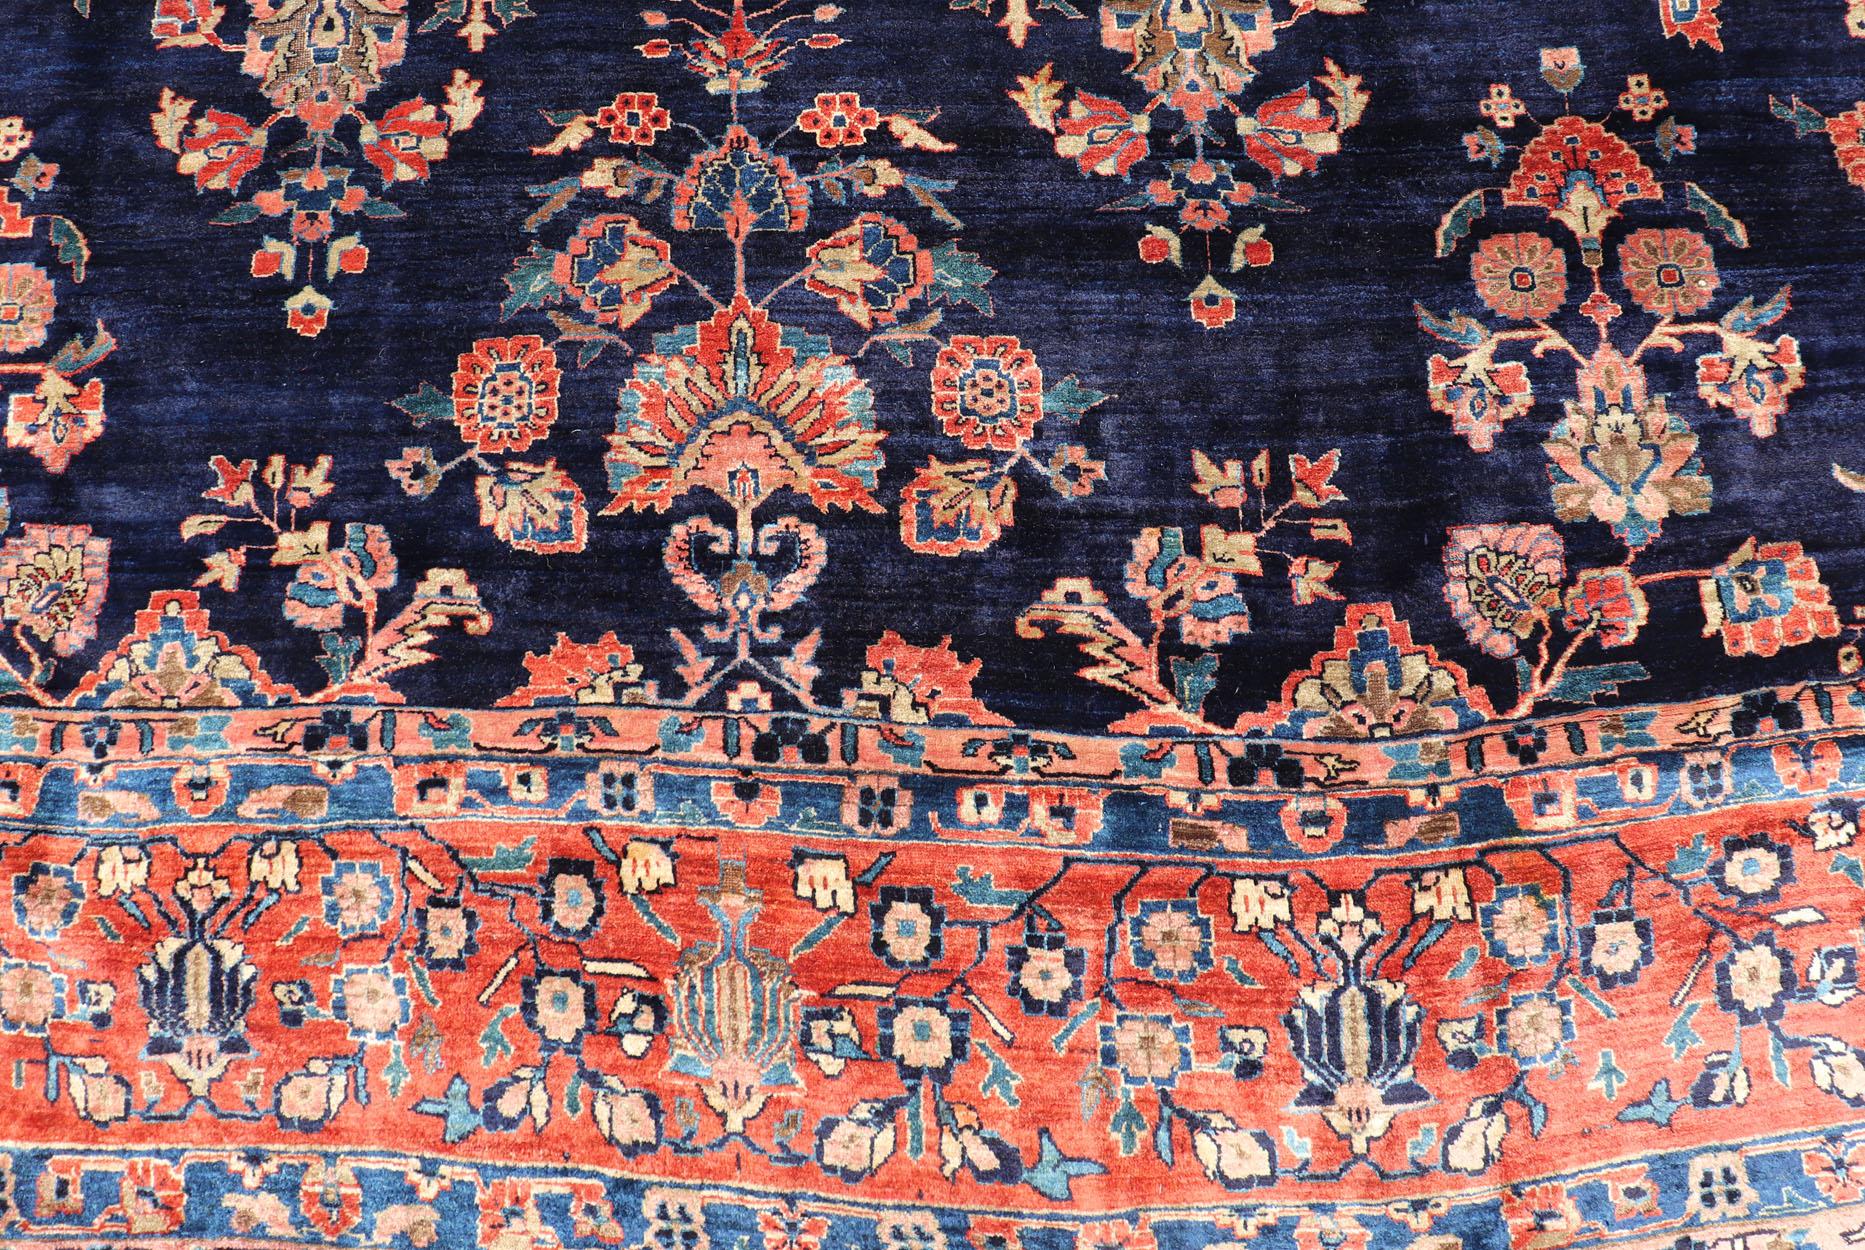 Antique Large Sarouk Faraghan Rug with Floral Pattern in Navy and Orange-Red For Sale 8